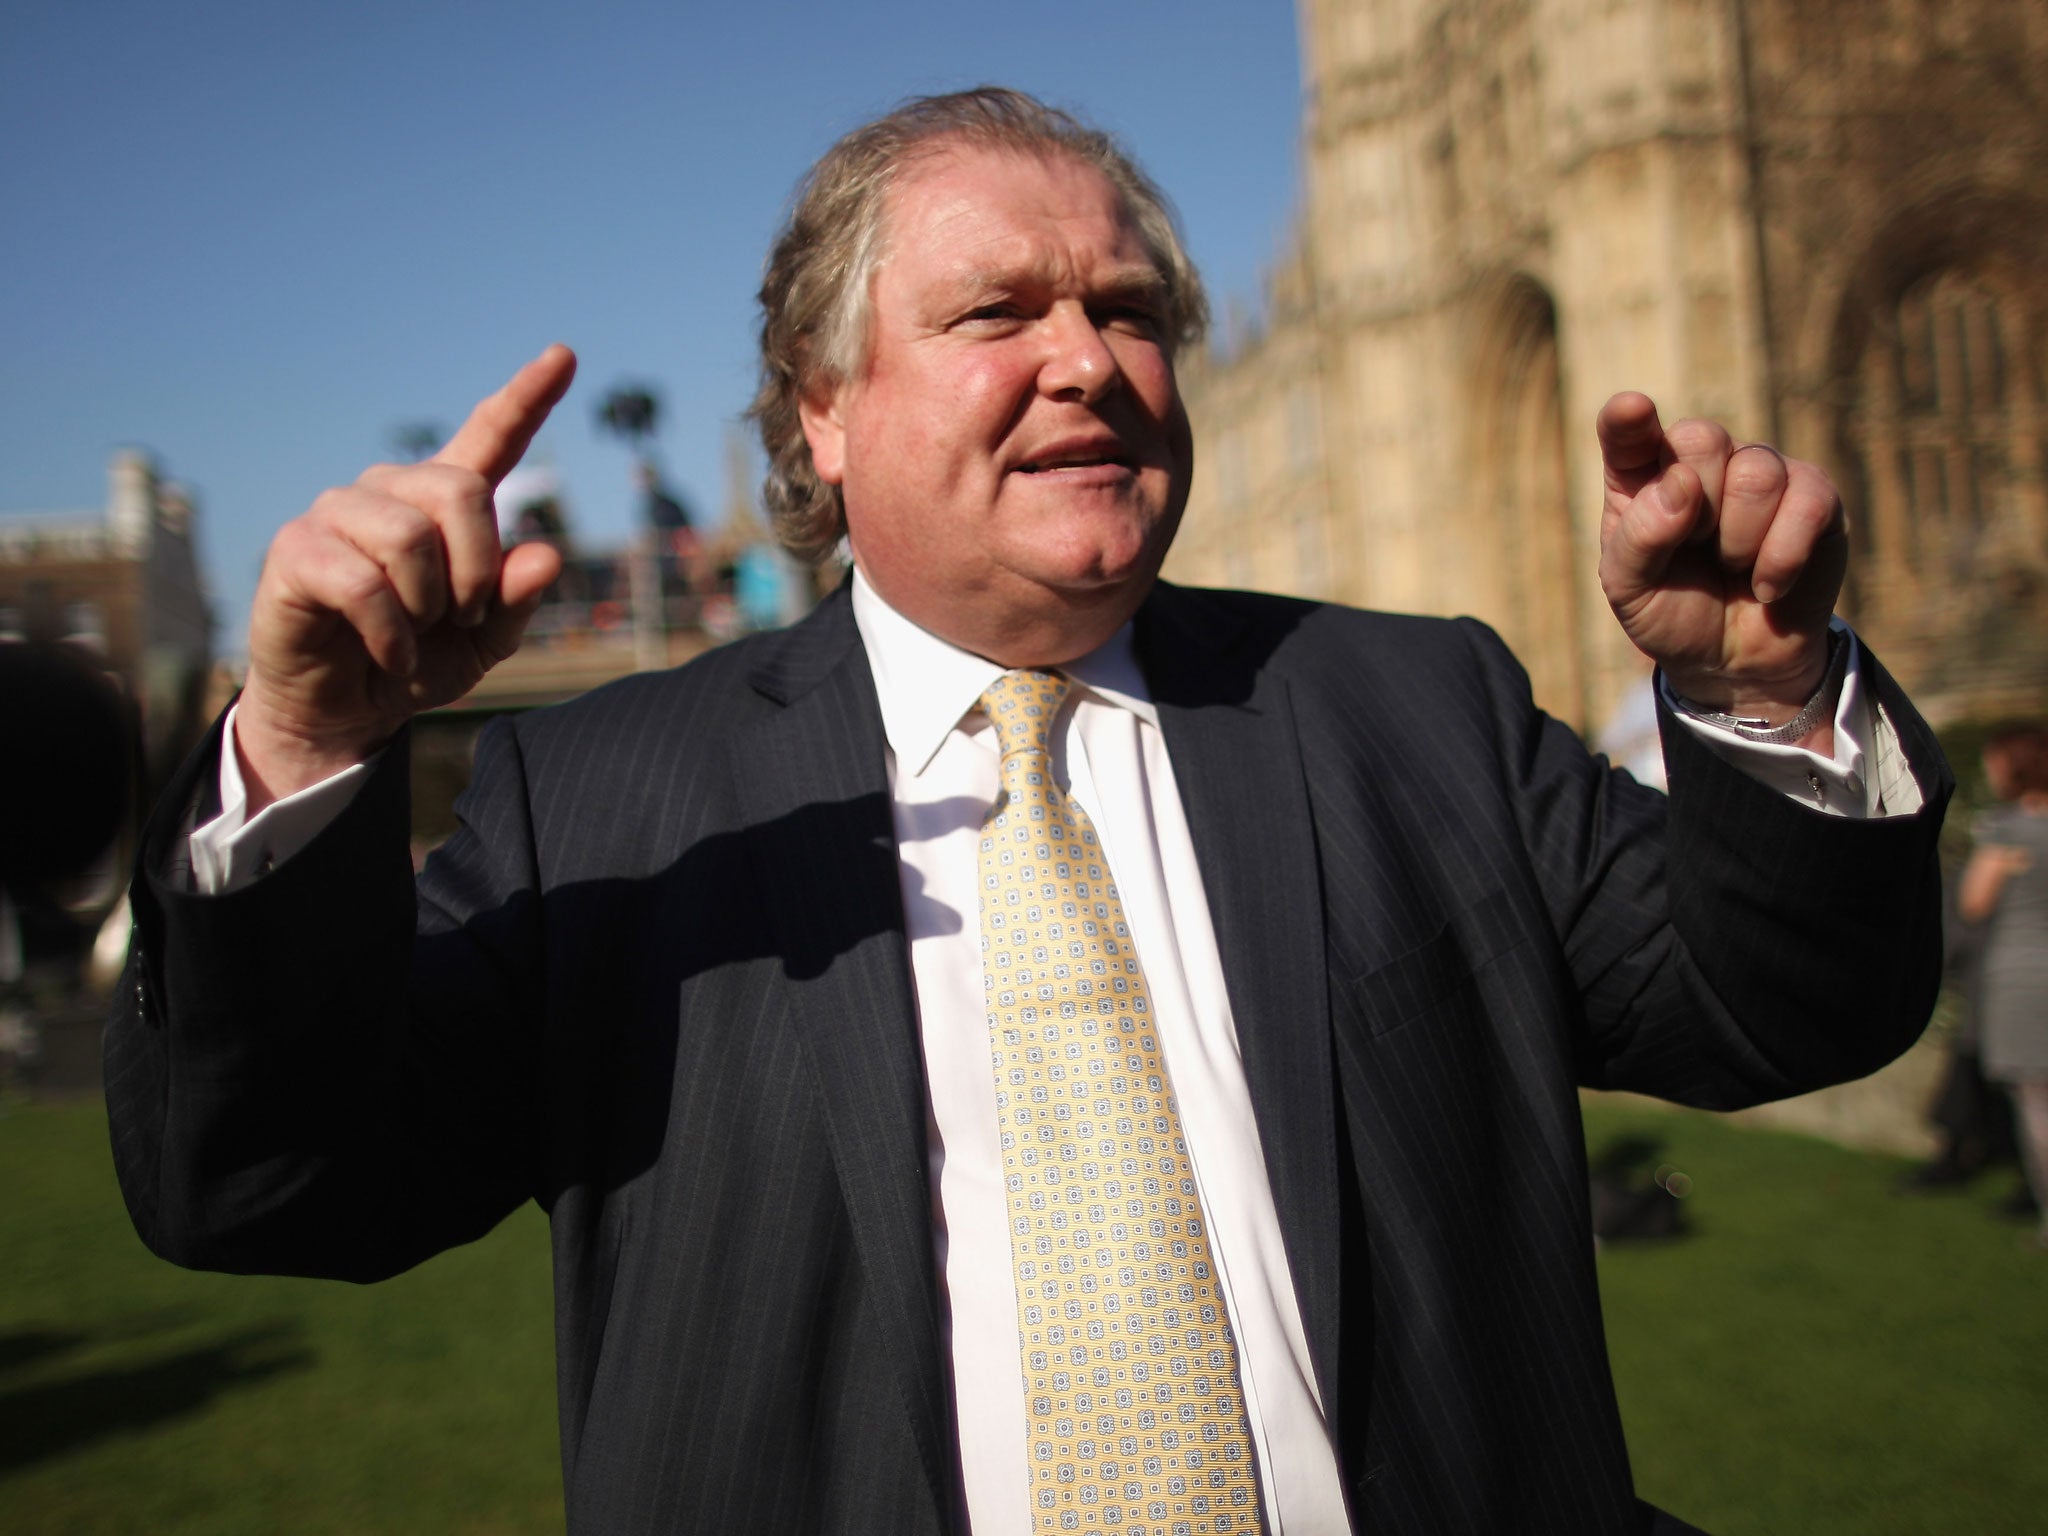 Lord Digby Jones was interrupted by Wanda Jackson’s yodelling